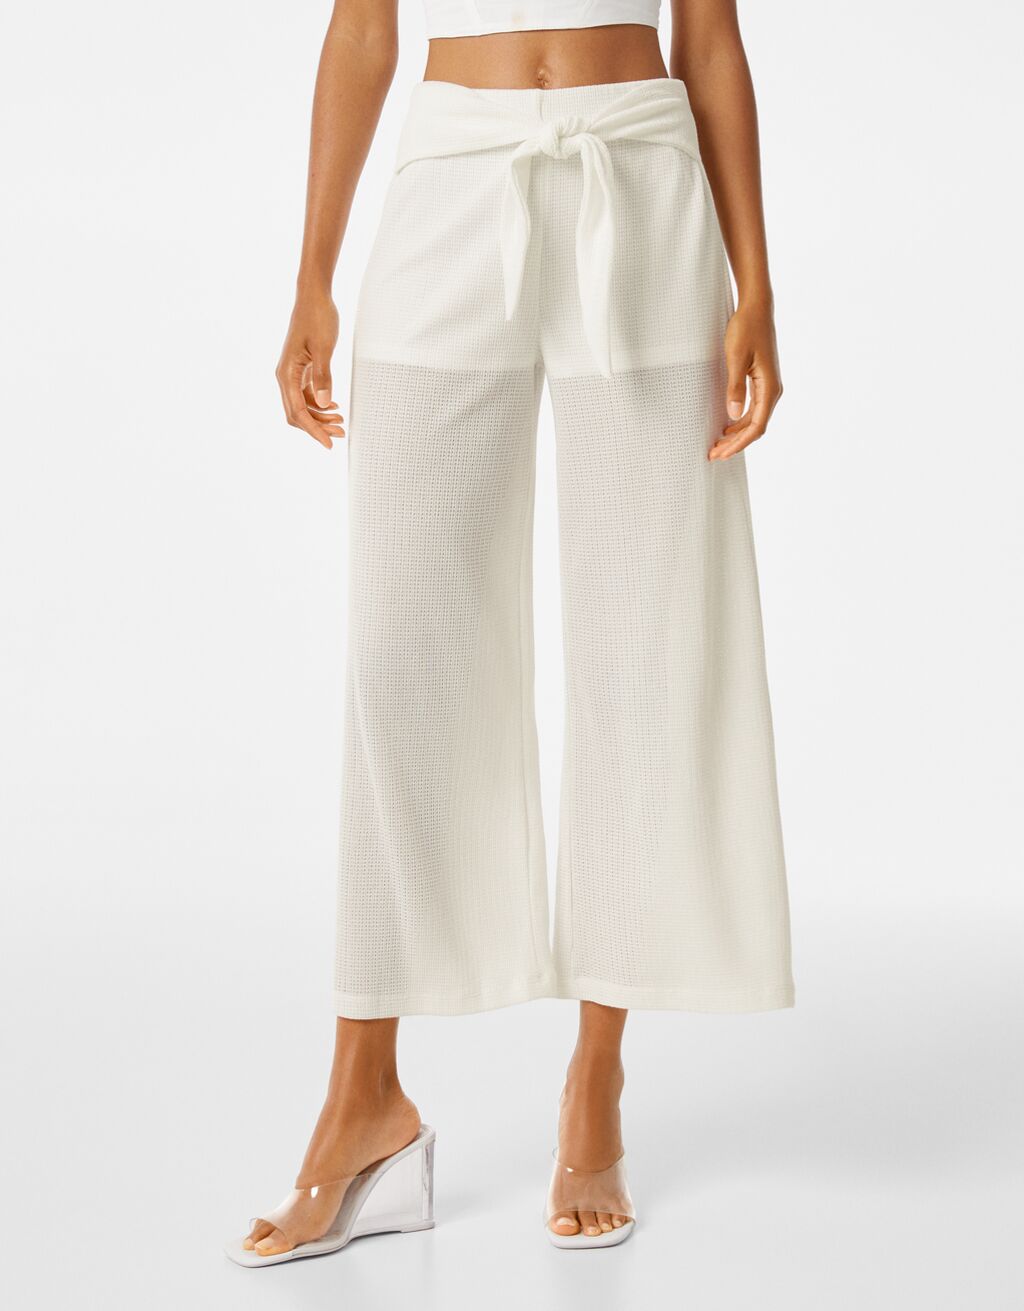 Flowing rustic-effect trousers